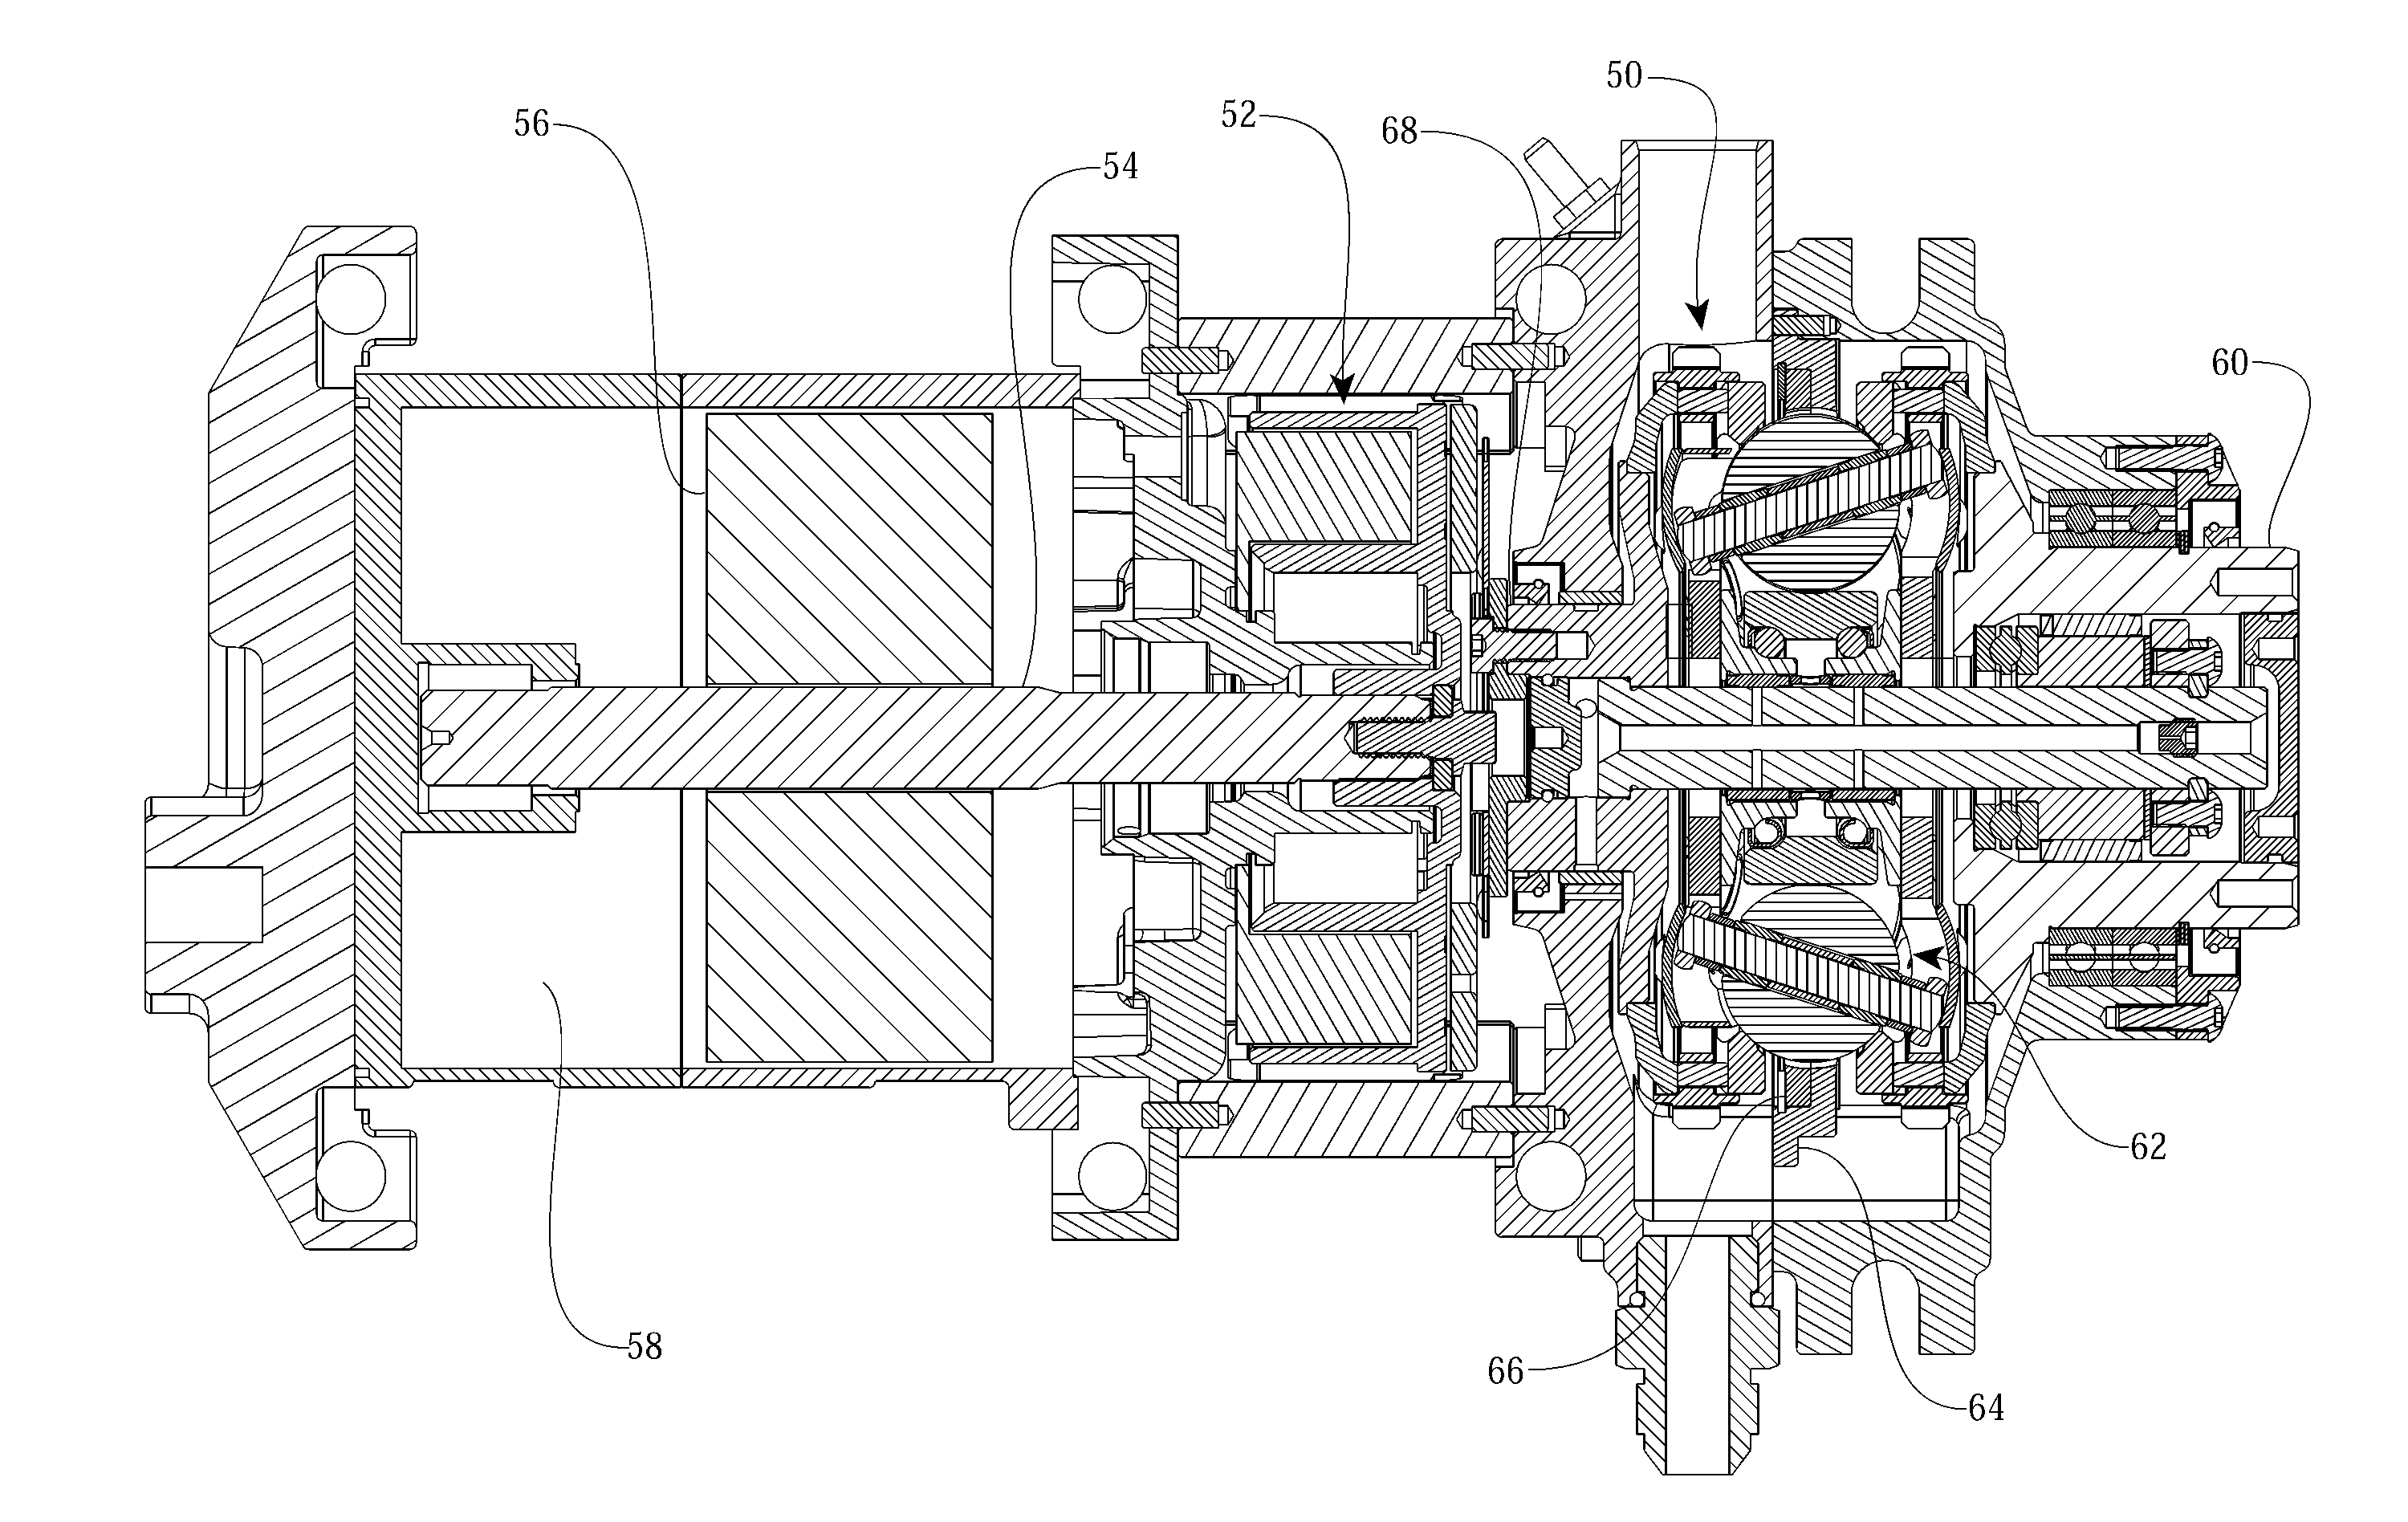 Refrigeration system having a continuously variable transmission